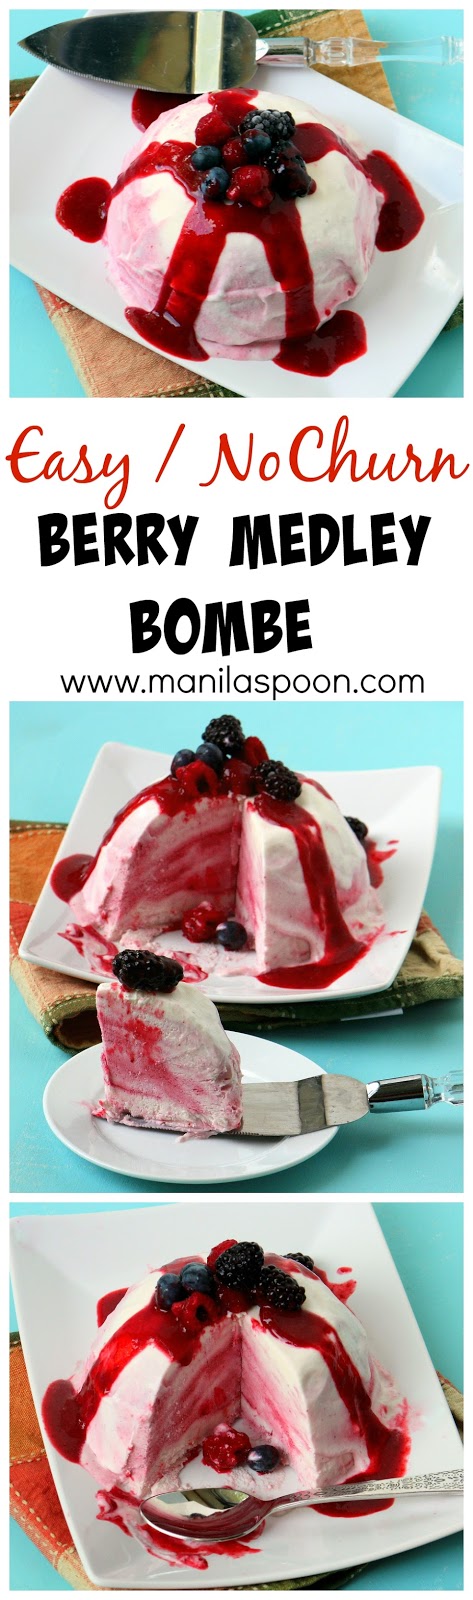 o need for an ice cream maker to make this super simple frozen dessert - Berry Medley Bombe. Simply mix the ingredients together then freeze. Enjoy with a sweet-tangy berry sauce.